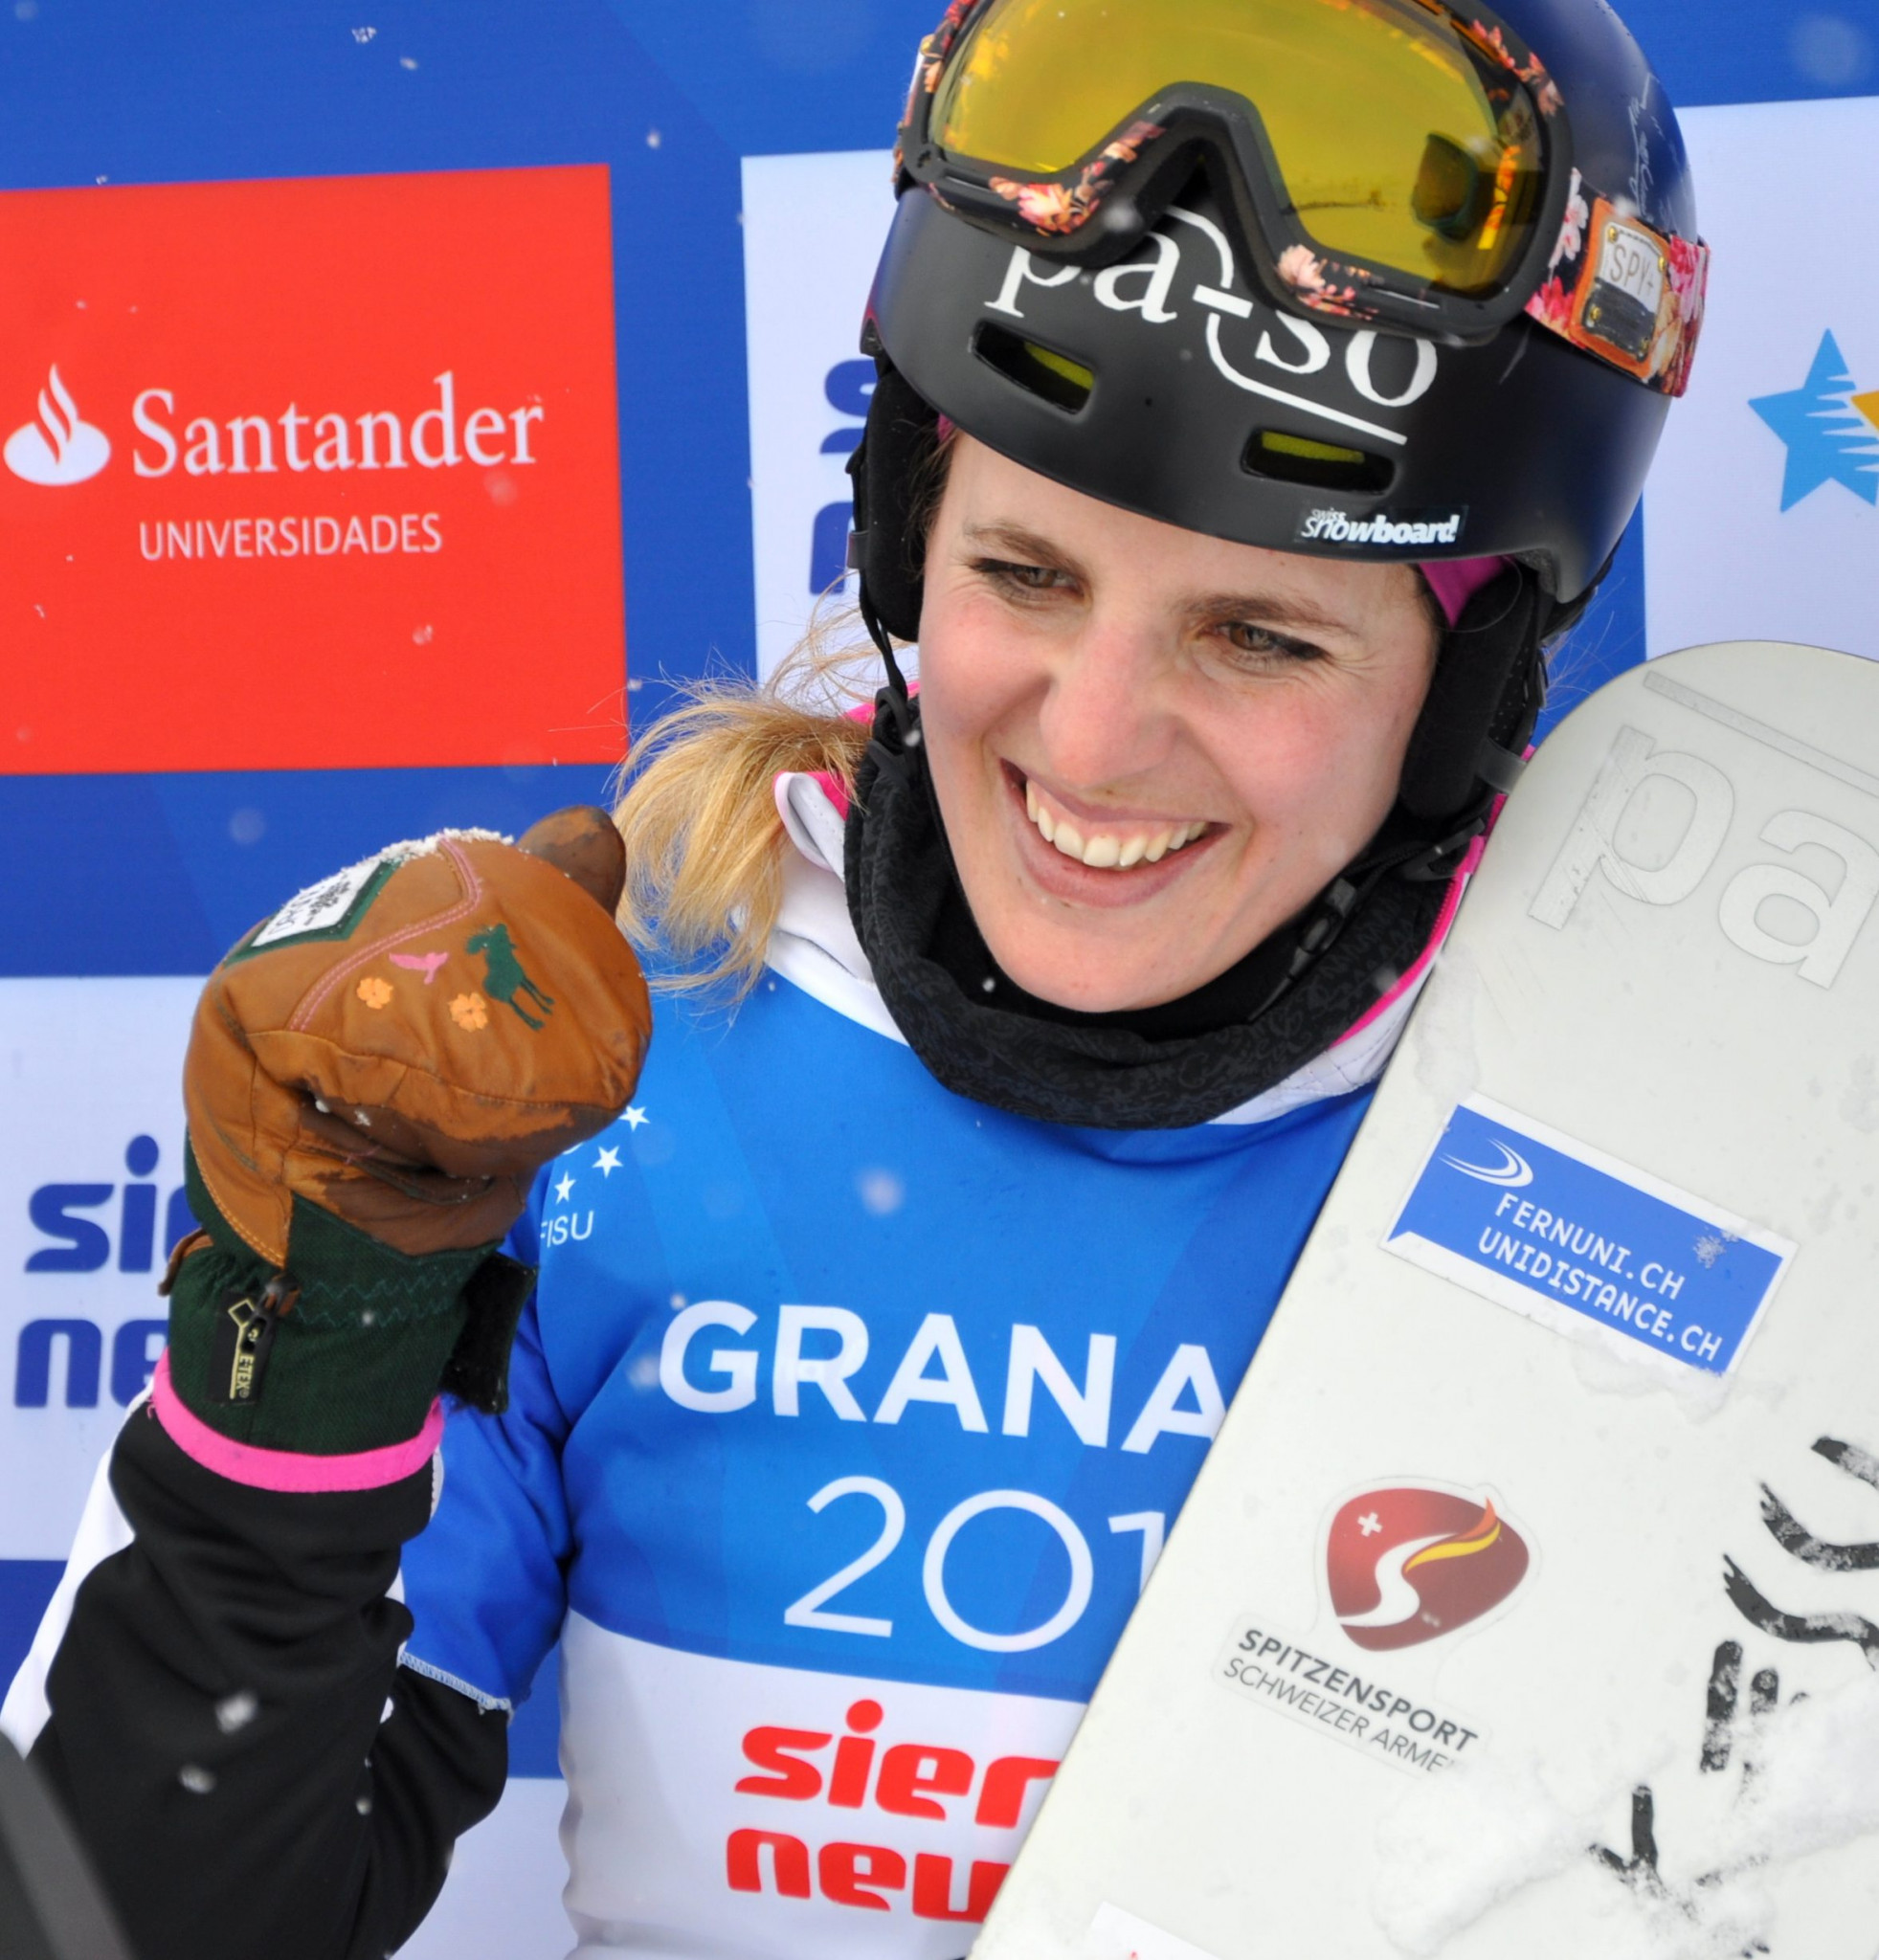 Switzerland's Patrizia Kummer celebrates her Winter Universiade gold medal in the parallel giant slalom at Granada 2015 - a year after she had won the Olympic gold medal in Sochi ©Patrizia Kummer